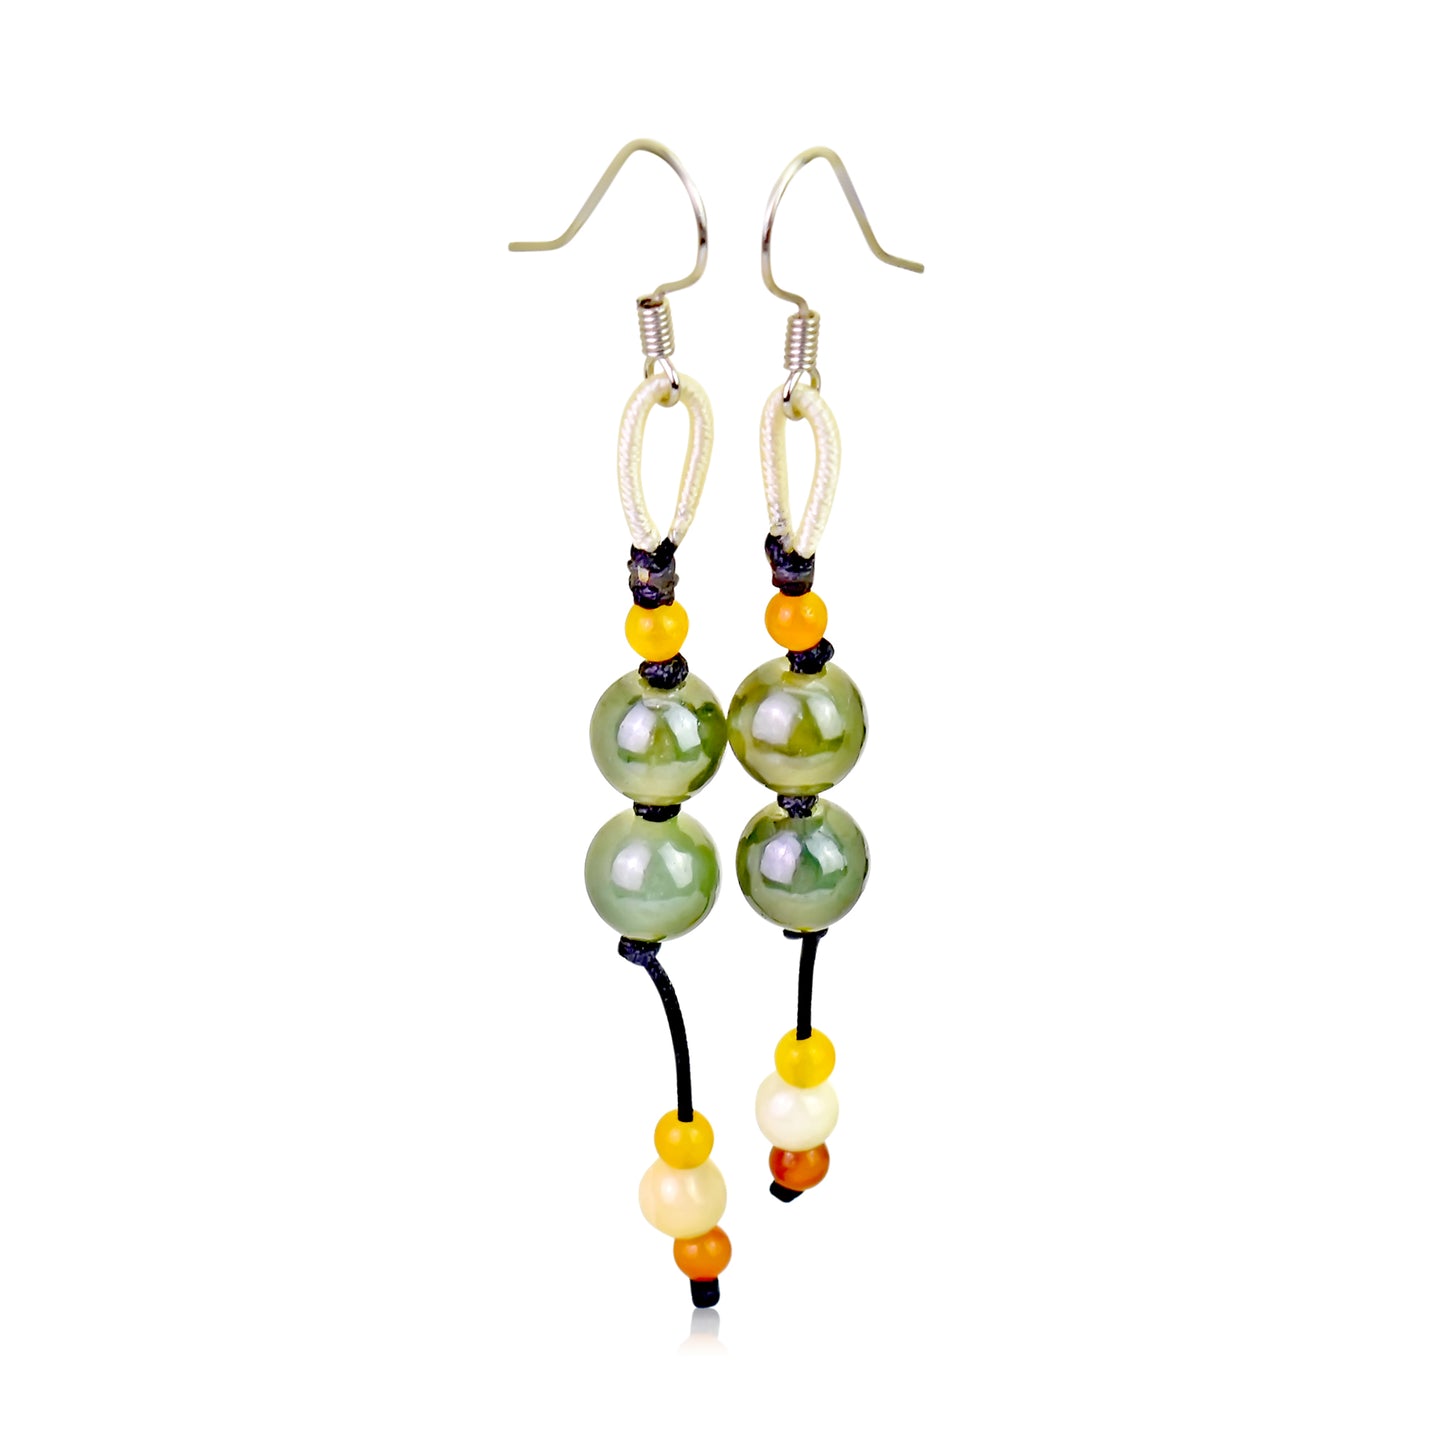 Make Every Look Unique with Eye-Catching Vibrant Jade Beads Earrings made with Black Cord